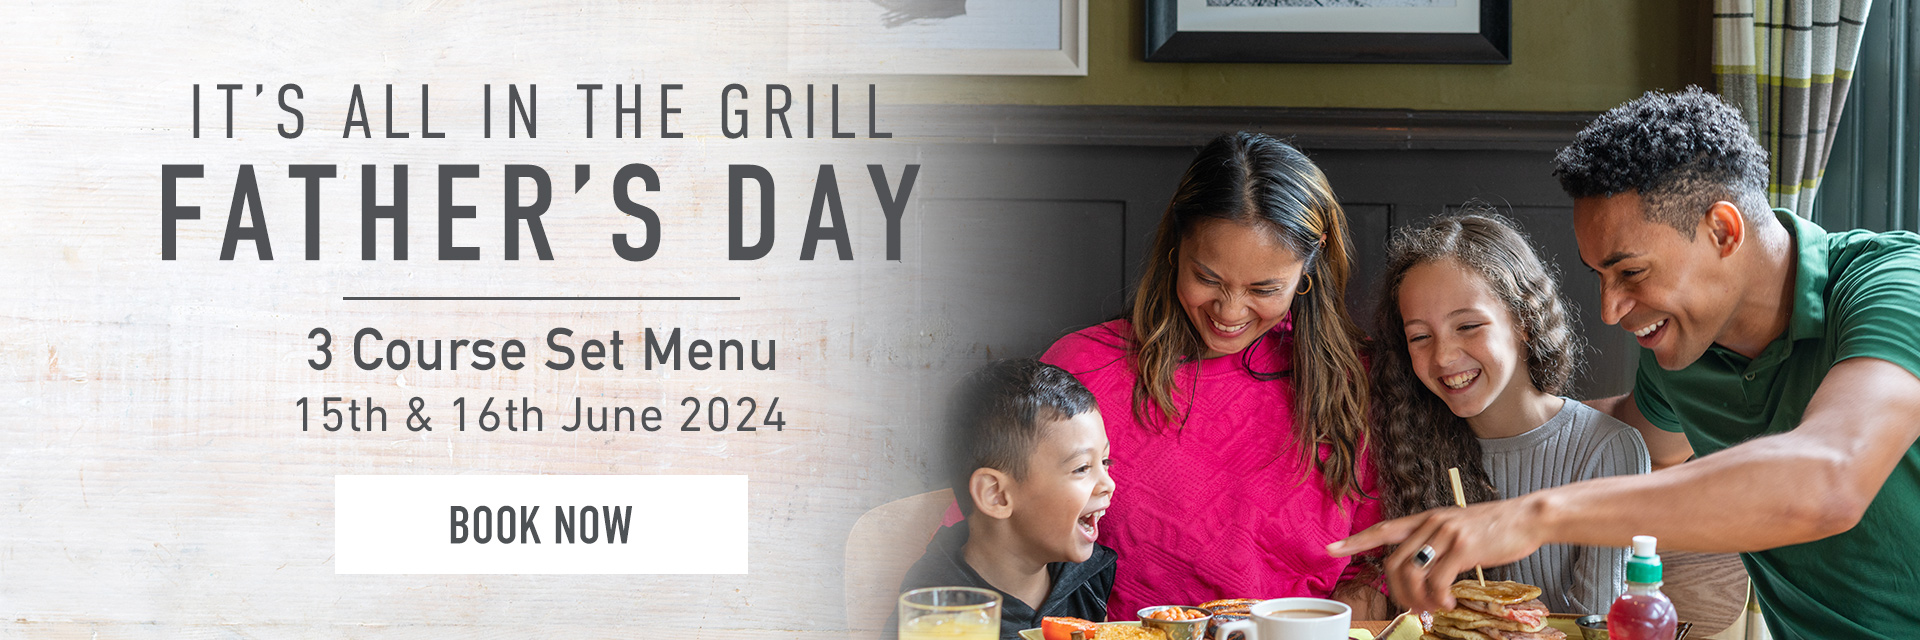 Father’s Day at Harvester East Kilbride